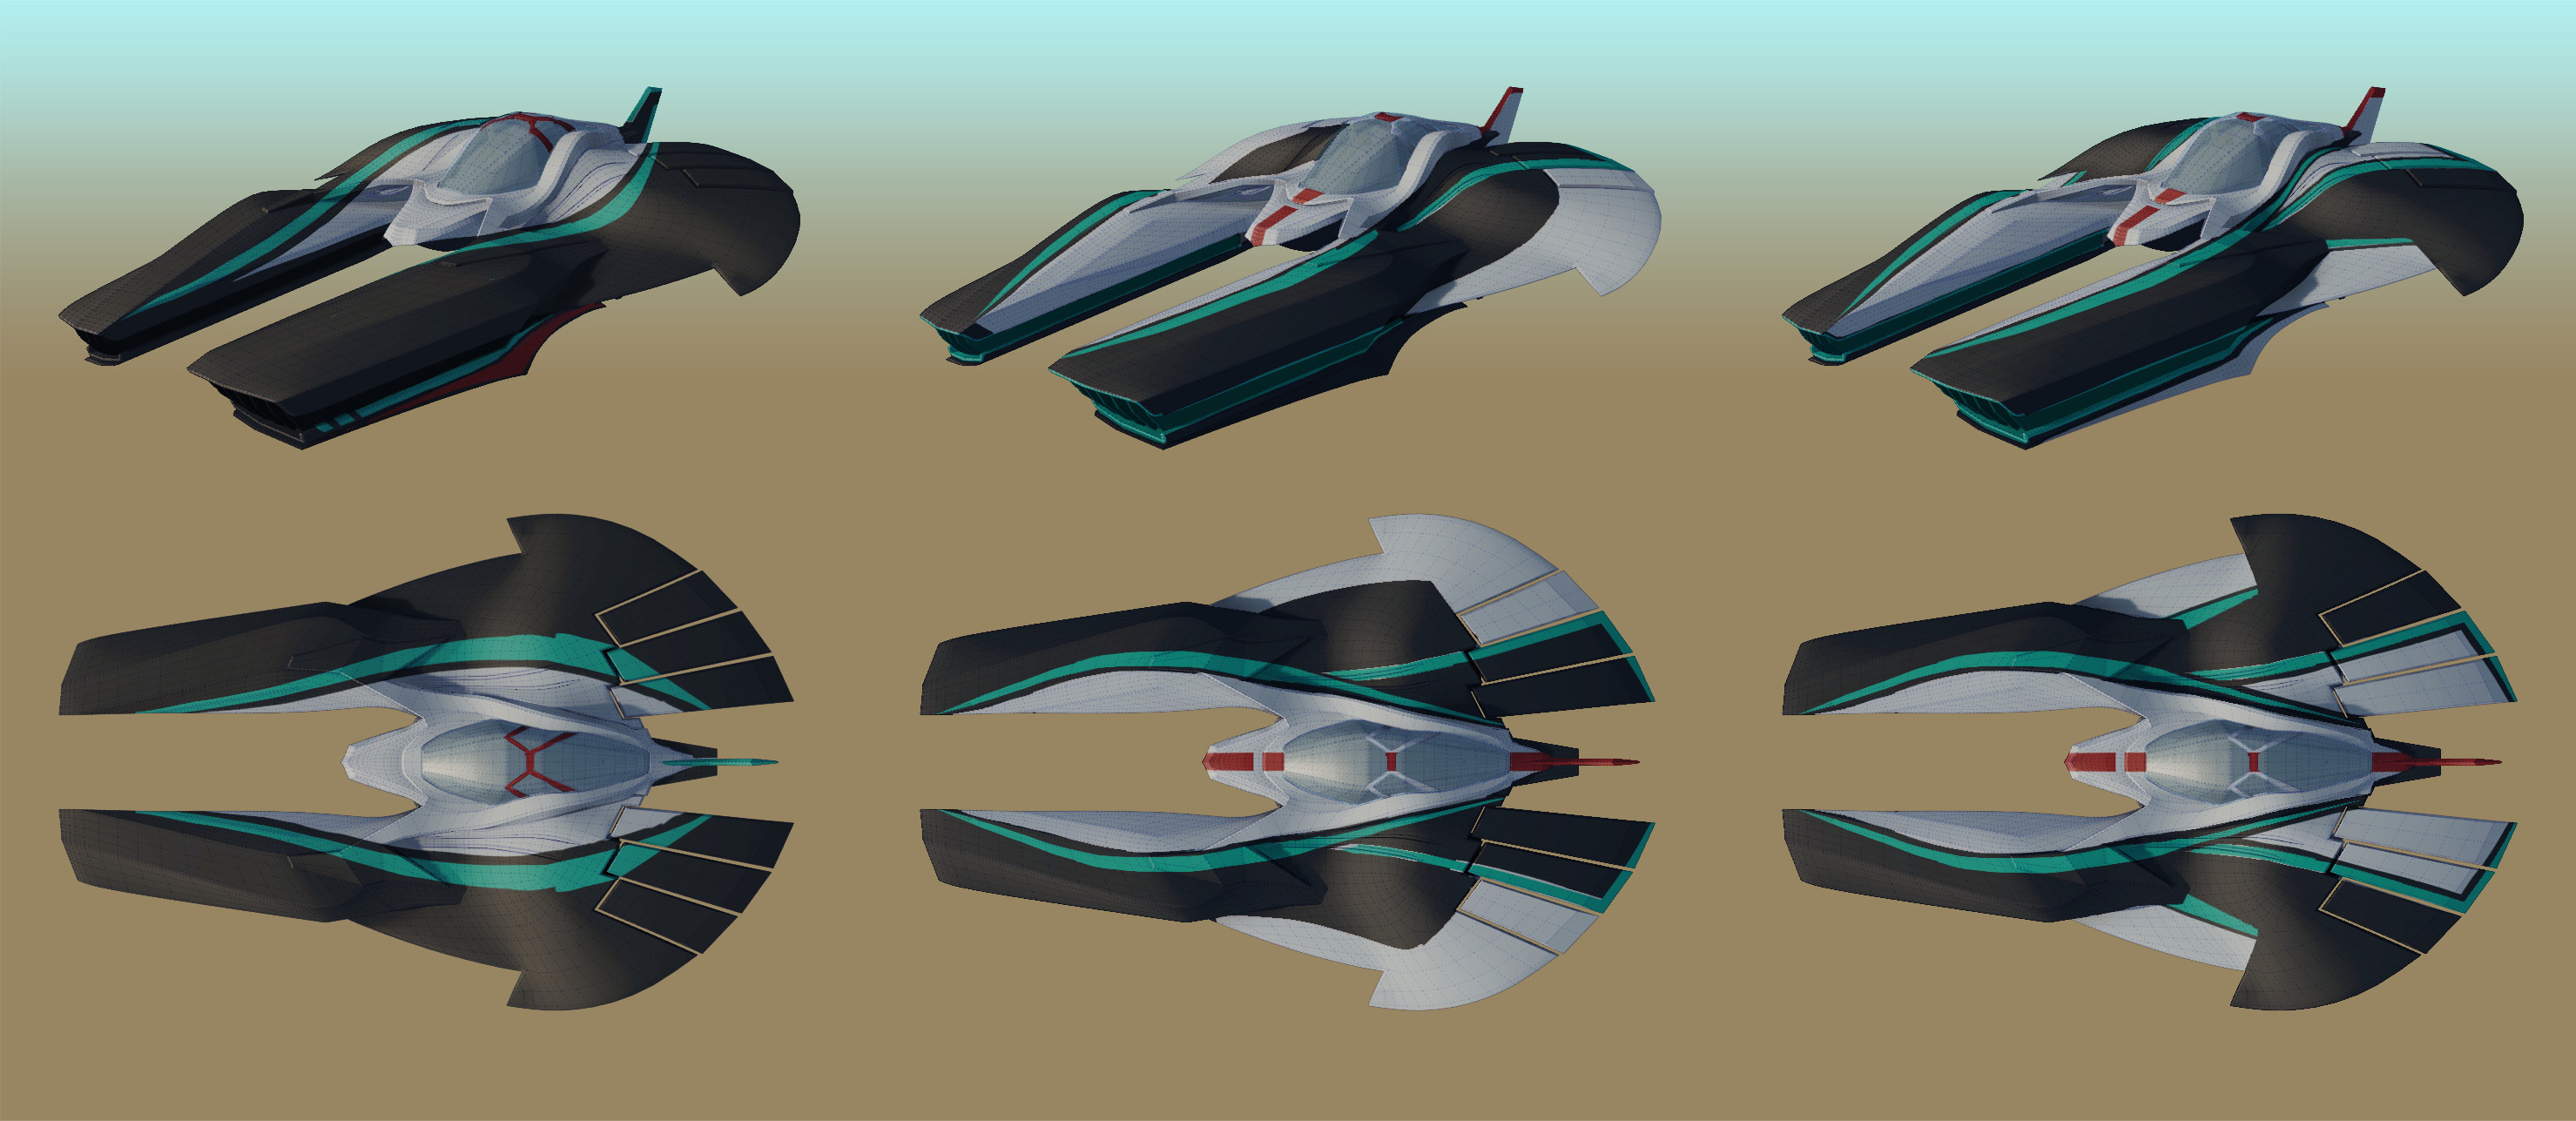 Refining this option which is heavily influenced by the Mercedes F1 car paintwork.